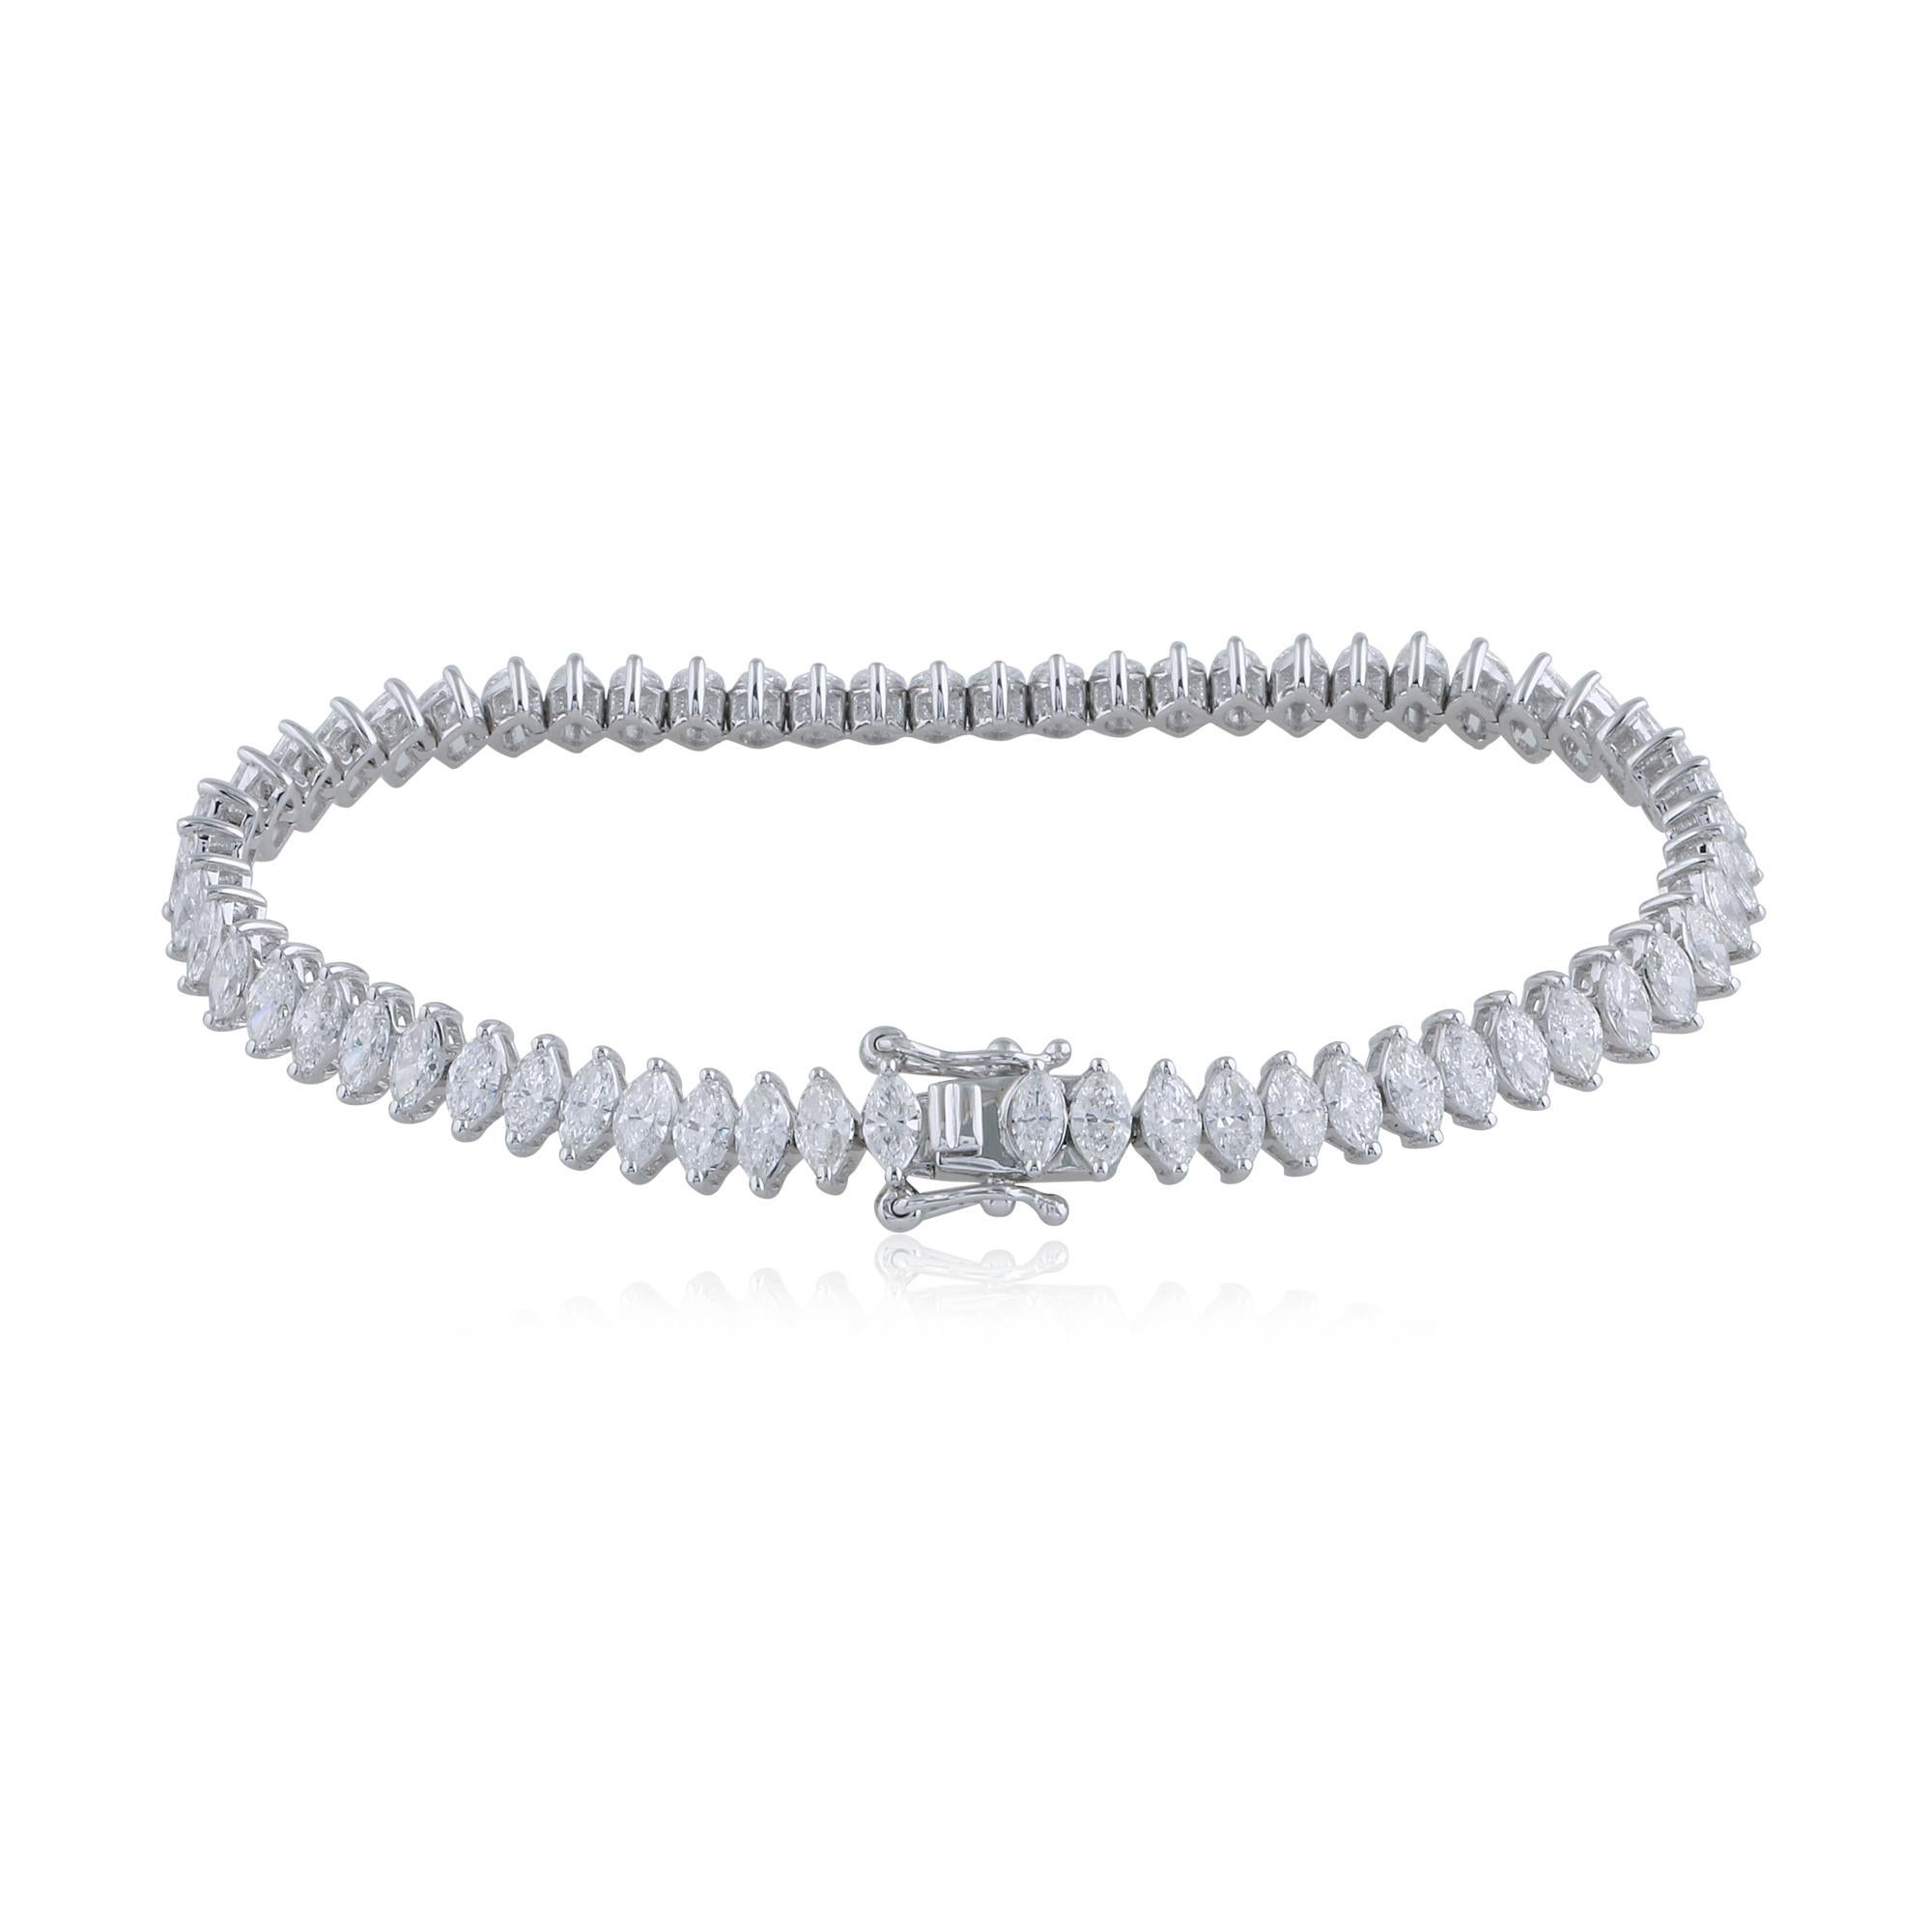 Item Code :- CN-40407
Gross Wt. :- 11.93 gm
18k White Gold Wt. :- 10.70 gm
Diamond Wt. :- 6.15 Ct. ( AVERAGE DIAMOND CLARITY SI1-SI2 & COLOR H-I )
Bracelet Length :- 7 Inches Long
✦ Sizing
.....................
We can adjust most items to fit your